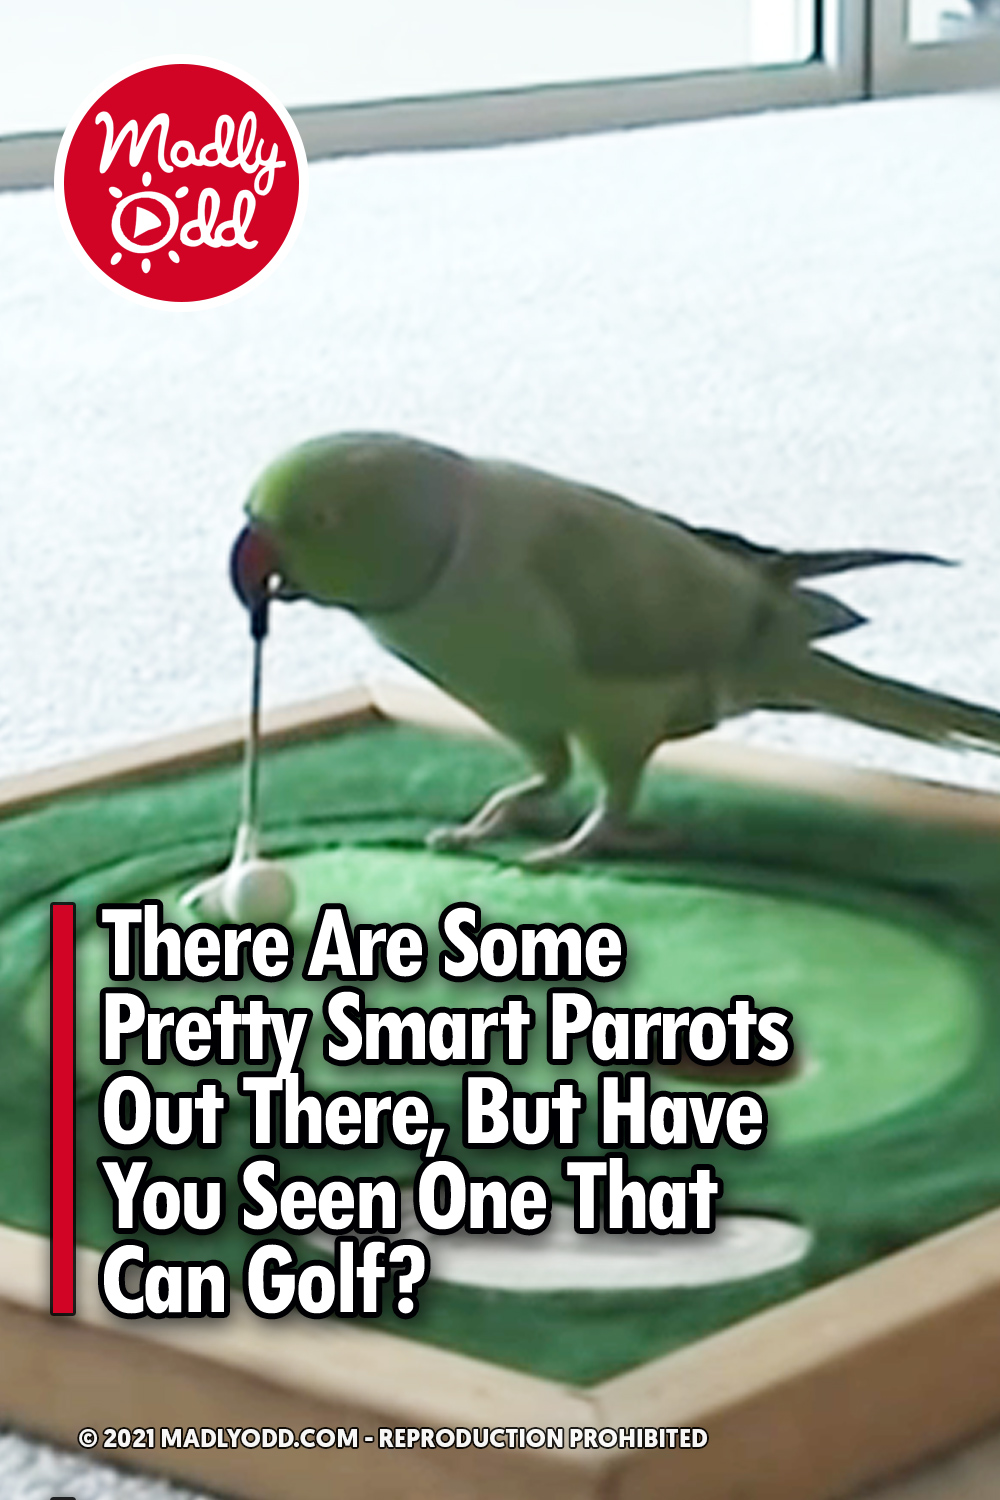 There Are Some Pretty Smart Parrots Out There, But Have You Seen One That Can Golf?